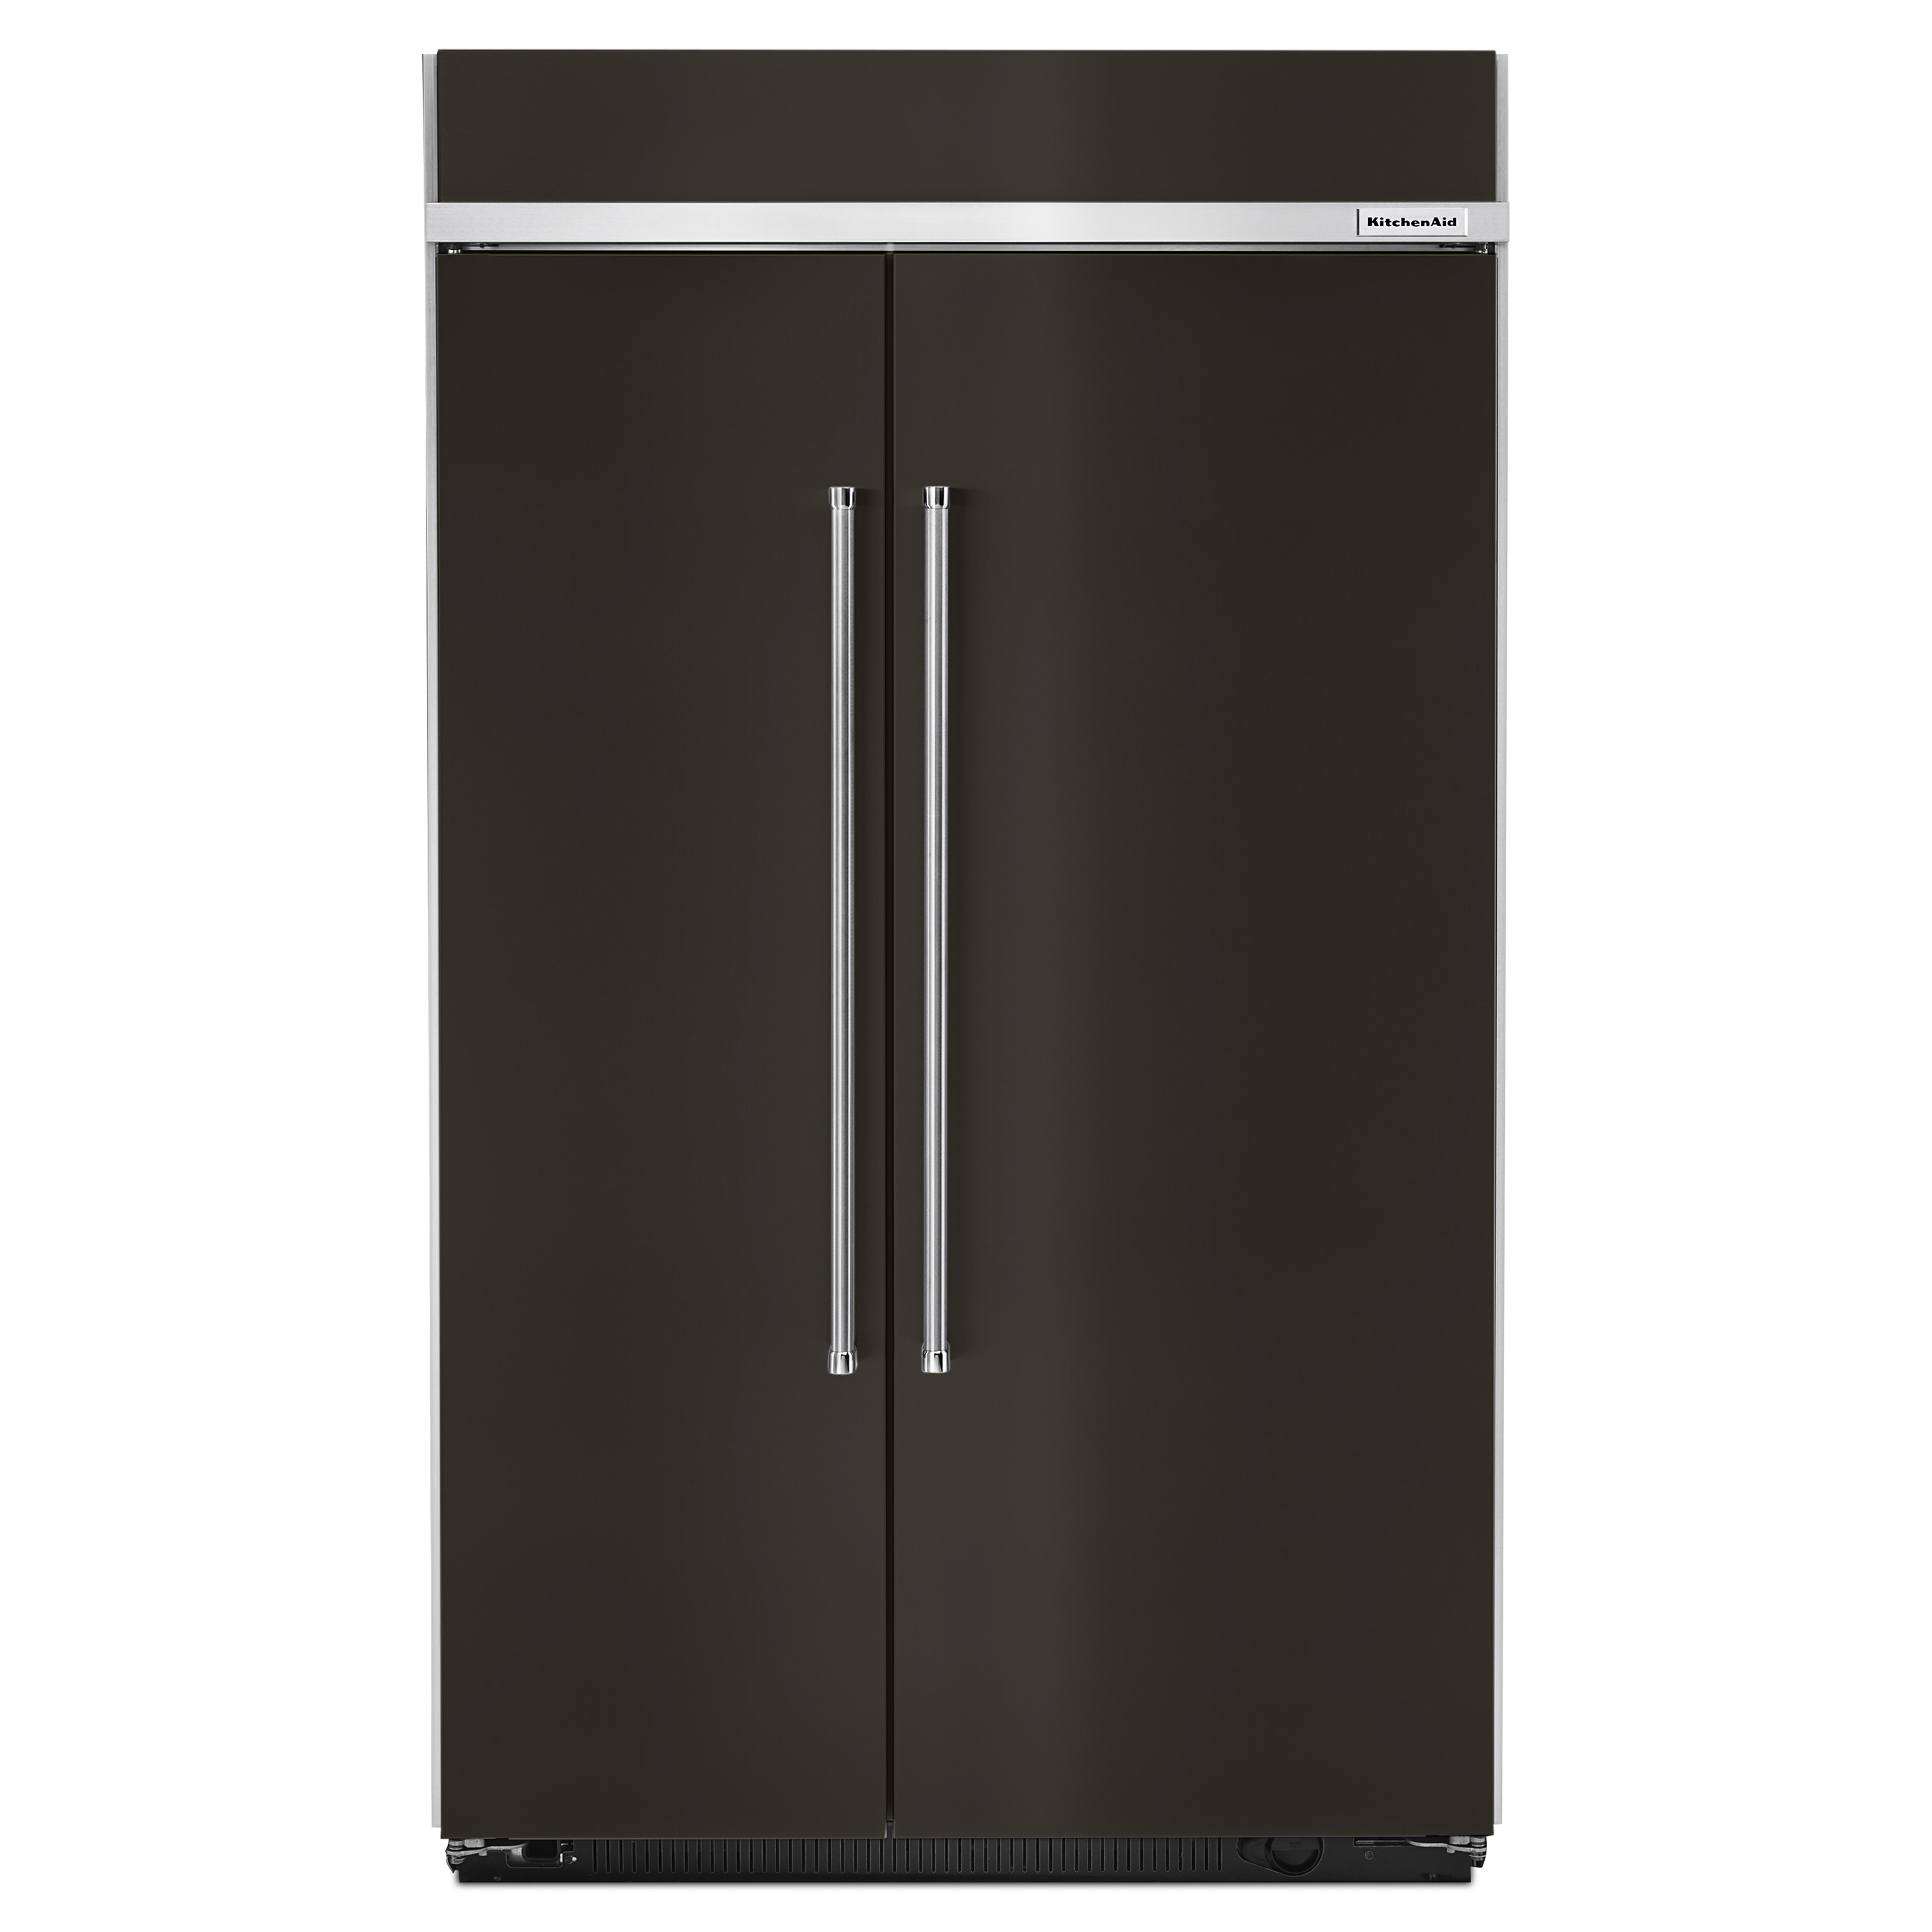 For new kitchen builds, added black stainless built-in refrigerator options include 48” and 42” Side-by-Side models and a 36” French Door model.